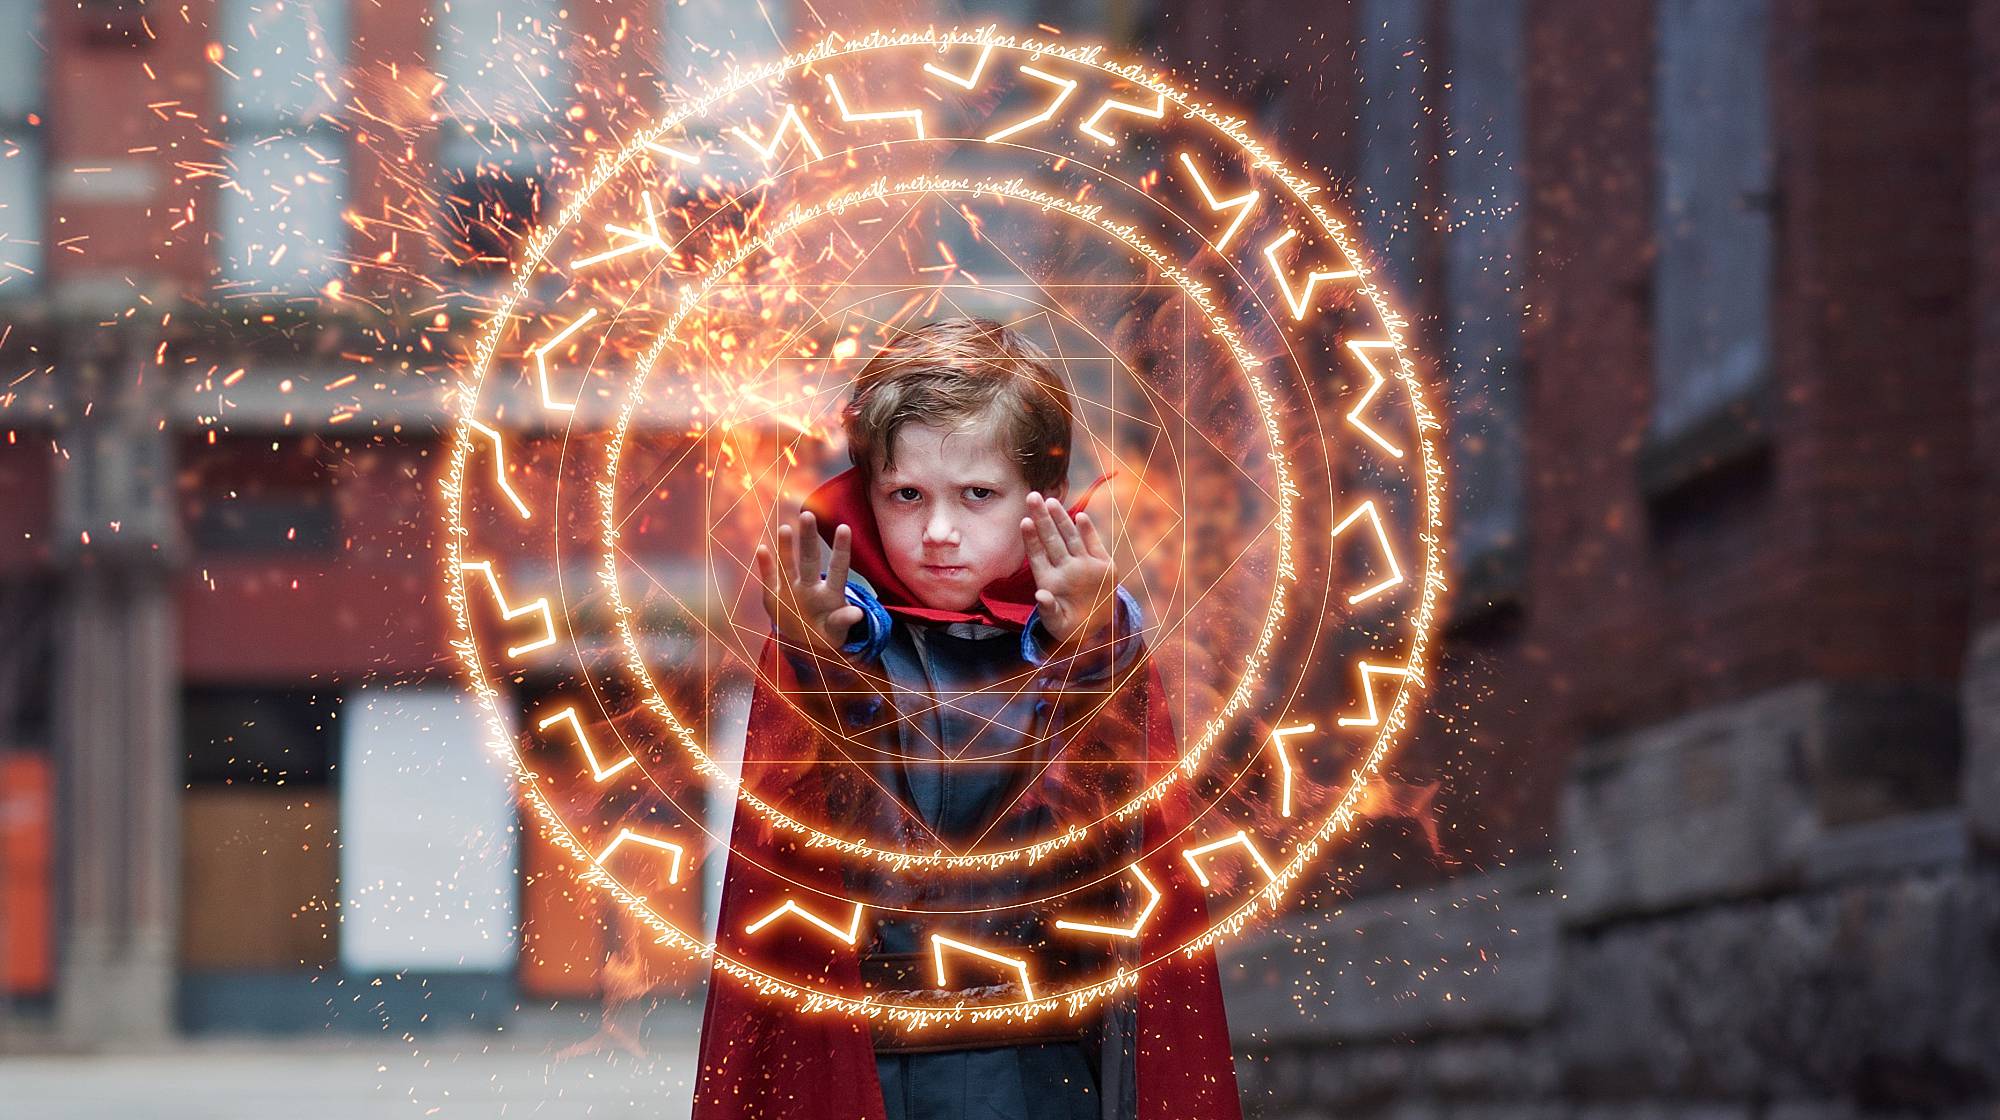 image of a little boy dressed as a comic book character shooting a circle of magic sparks and runes into the air